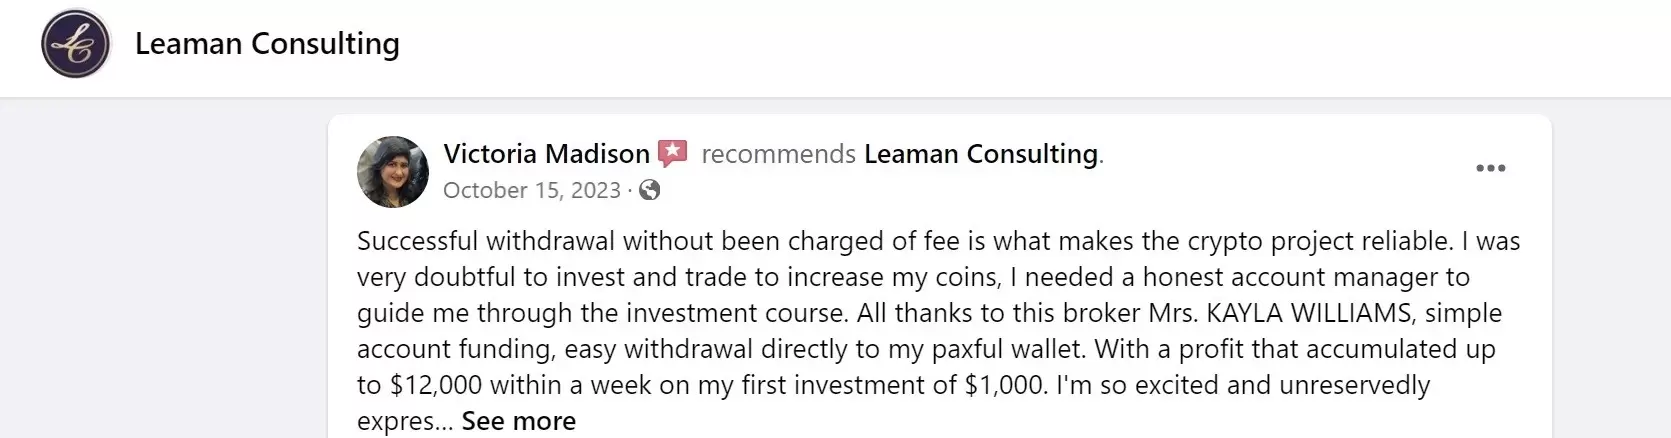 positive review of Leaman Consulting